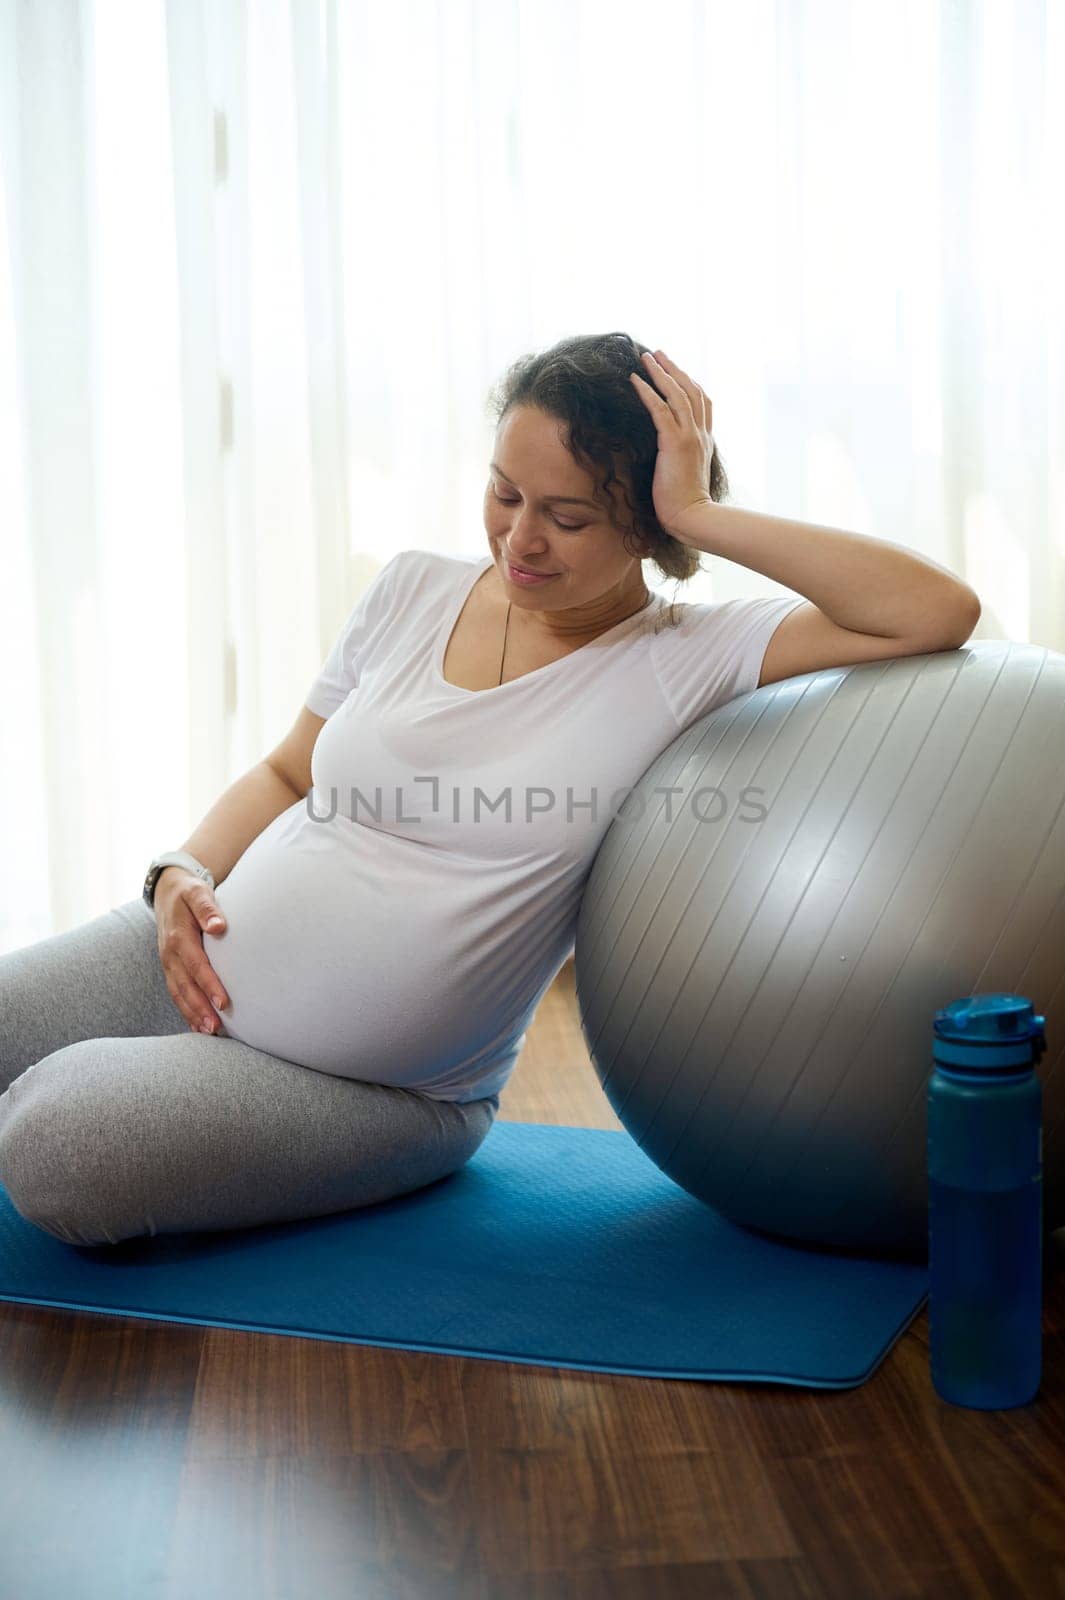 Happy pregnant woman gently stroking her belly, relaxing on a yoga mat after prenatal stretching exercises on fitball, smiling enjoying a healthy active lifestyle in pregnancy time and maternity leave